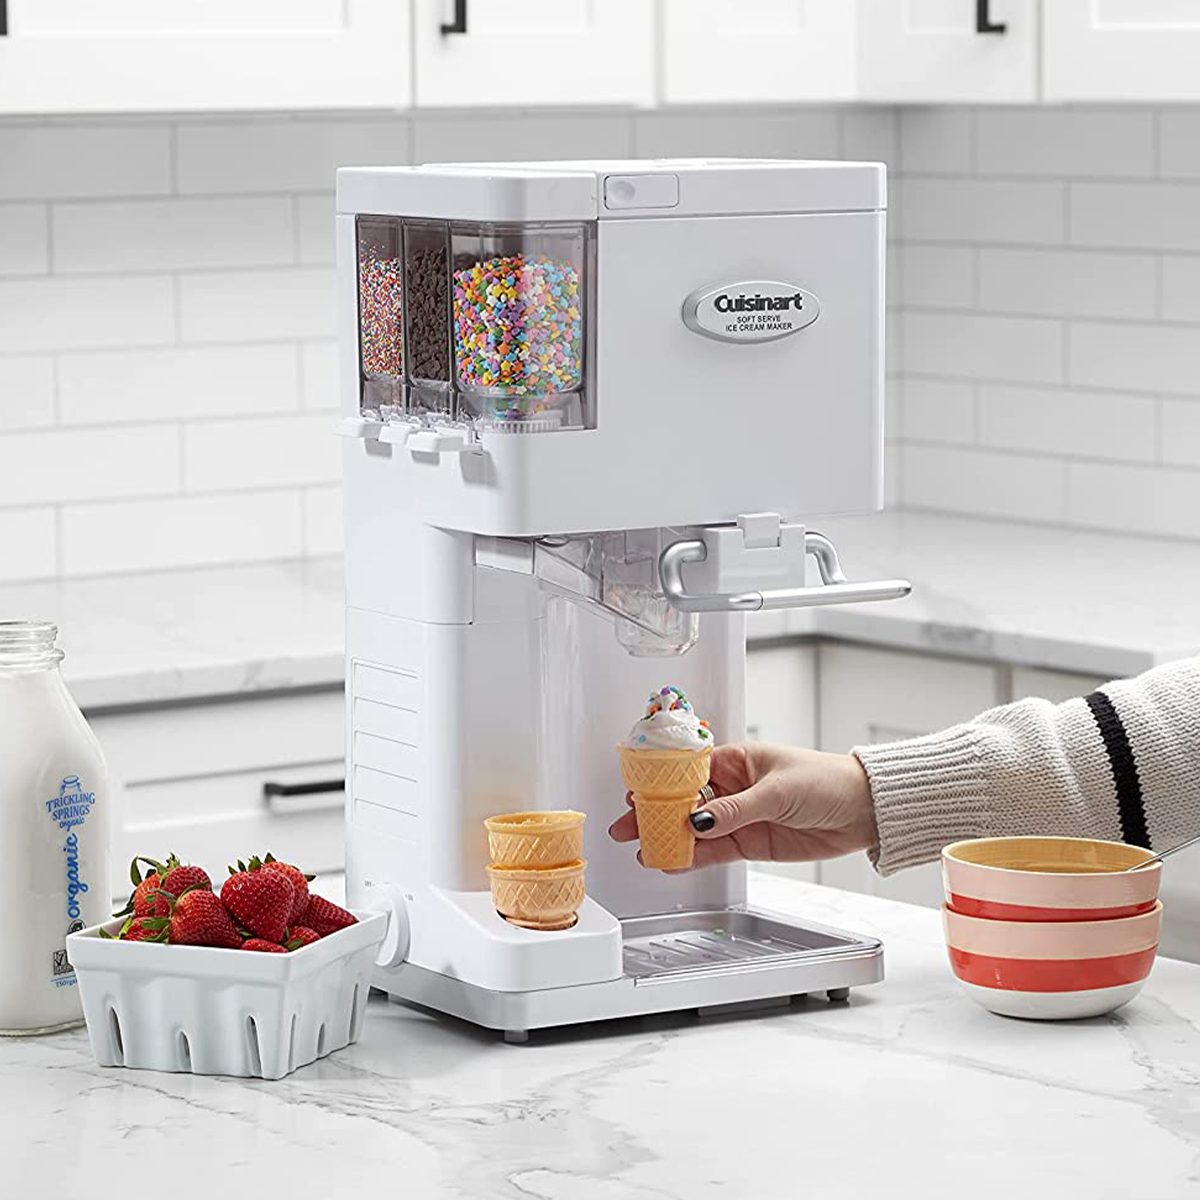 What Kind Of Ice Cream Mix Can Be Used In A Cuisinart Ice Cream Maker